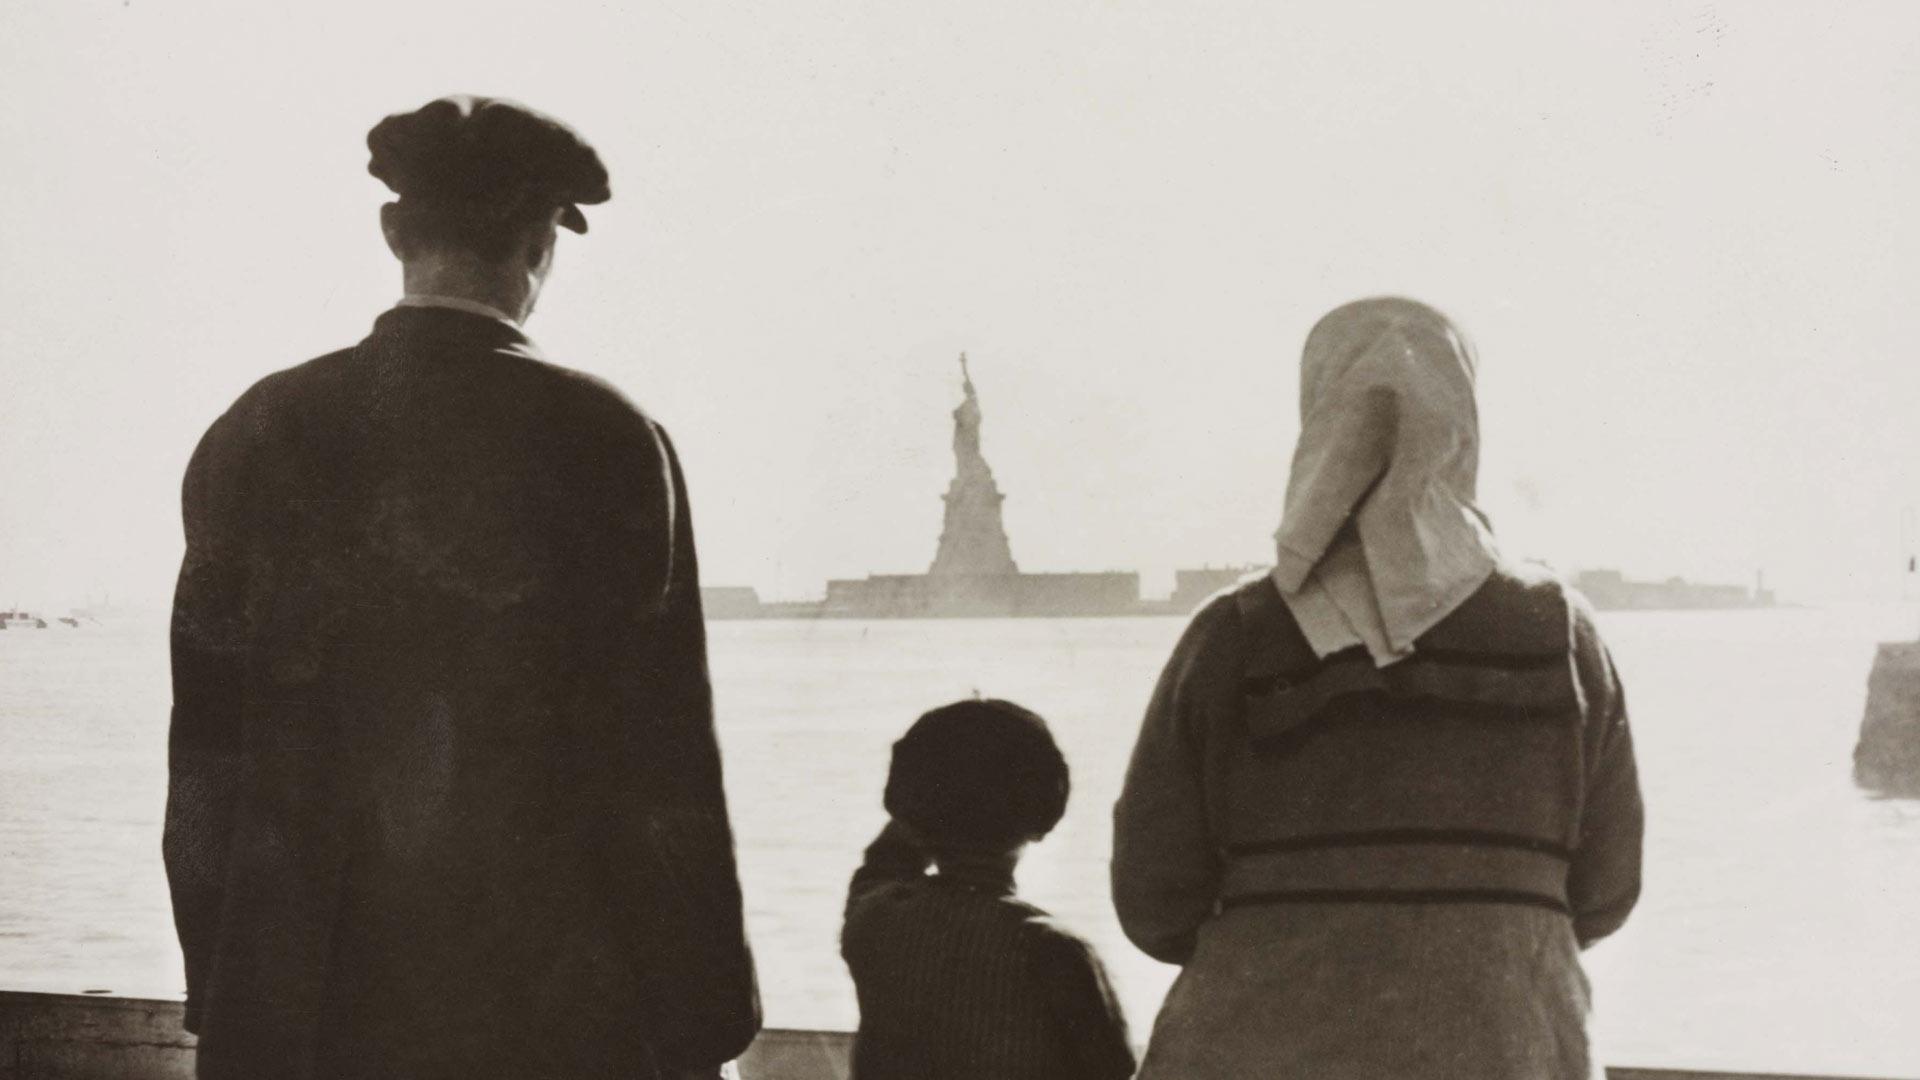 A man, woman, and child looking out at the Statue of Liberty